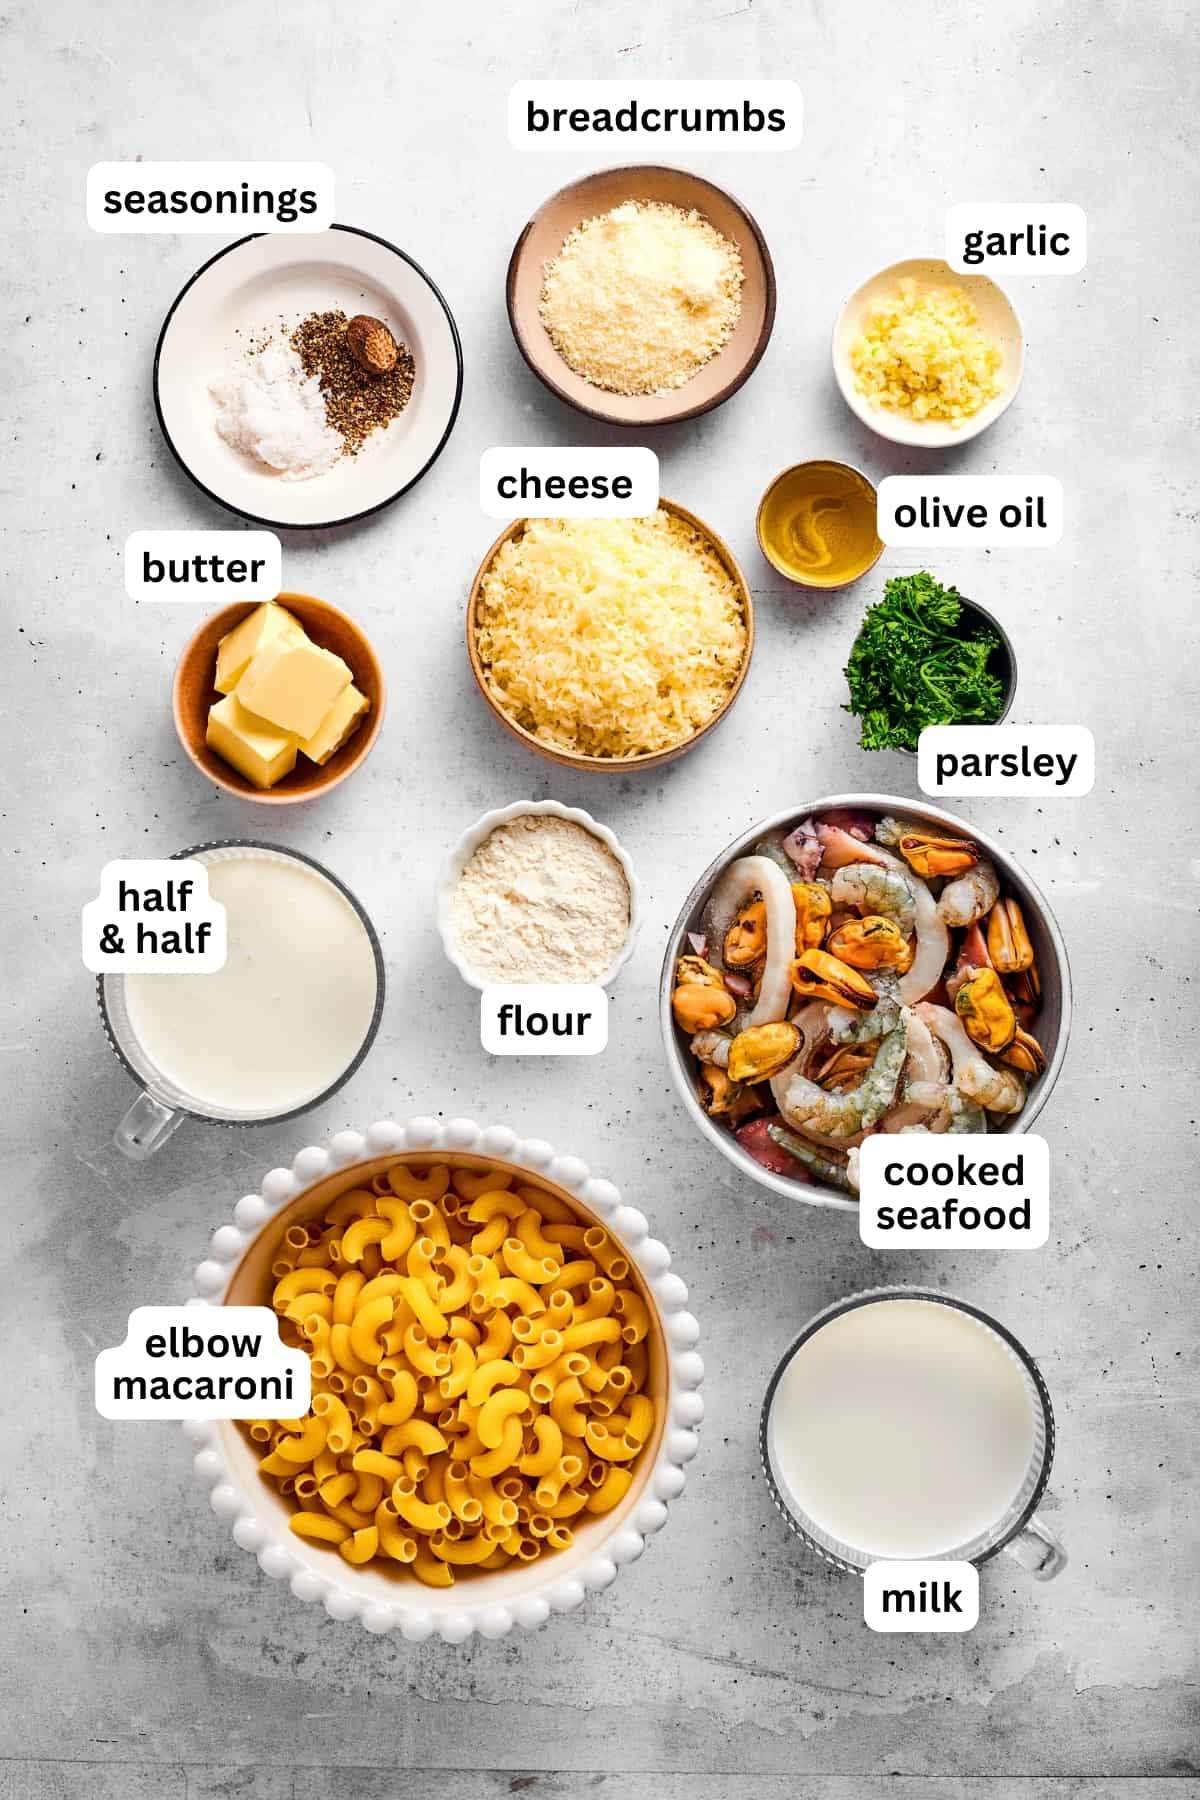 Overhead view of all the ingredients used for seafood mac and cheese.